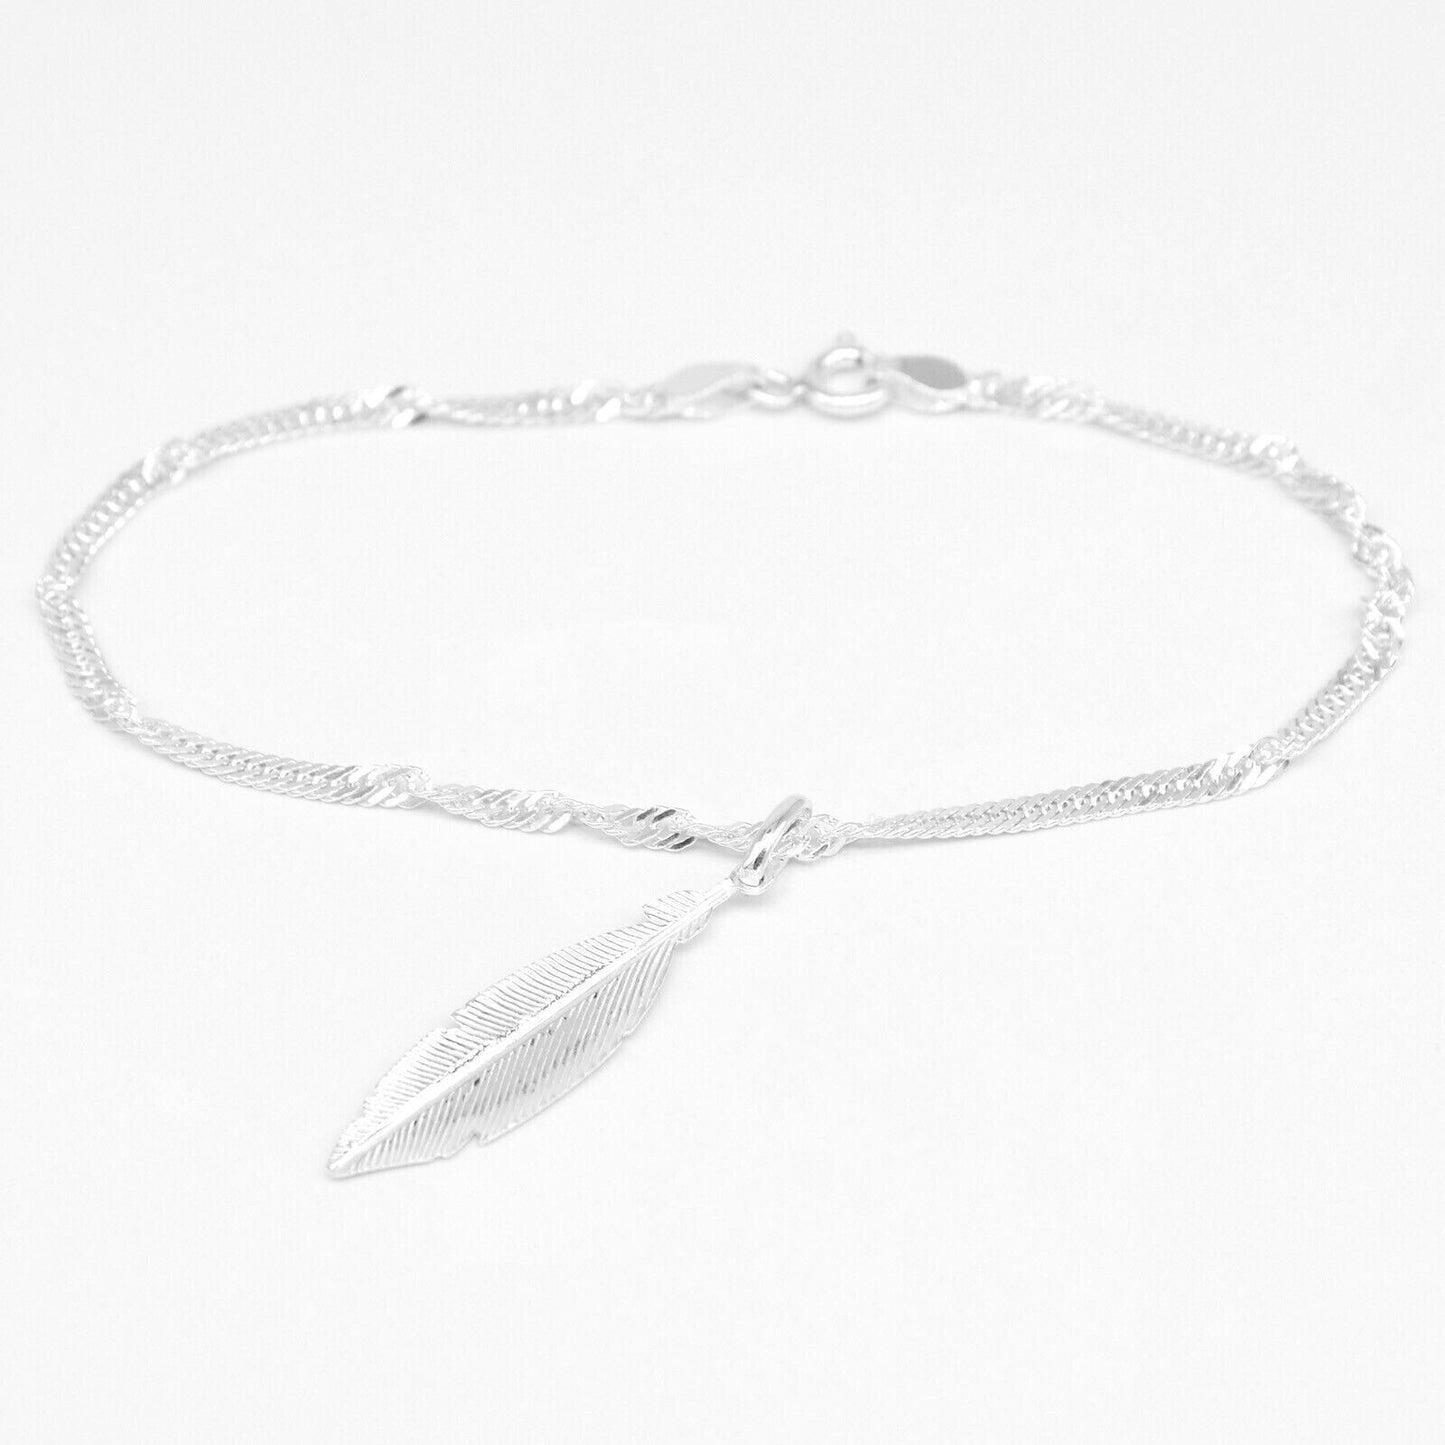 Genuine 925 Sterling Silver Singapore Chain Bracelet W/ Feather Charm